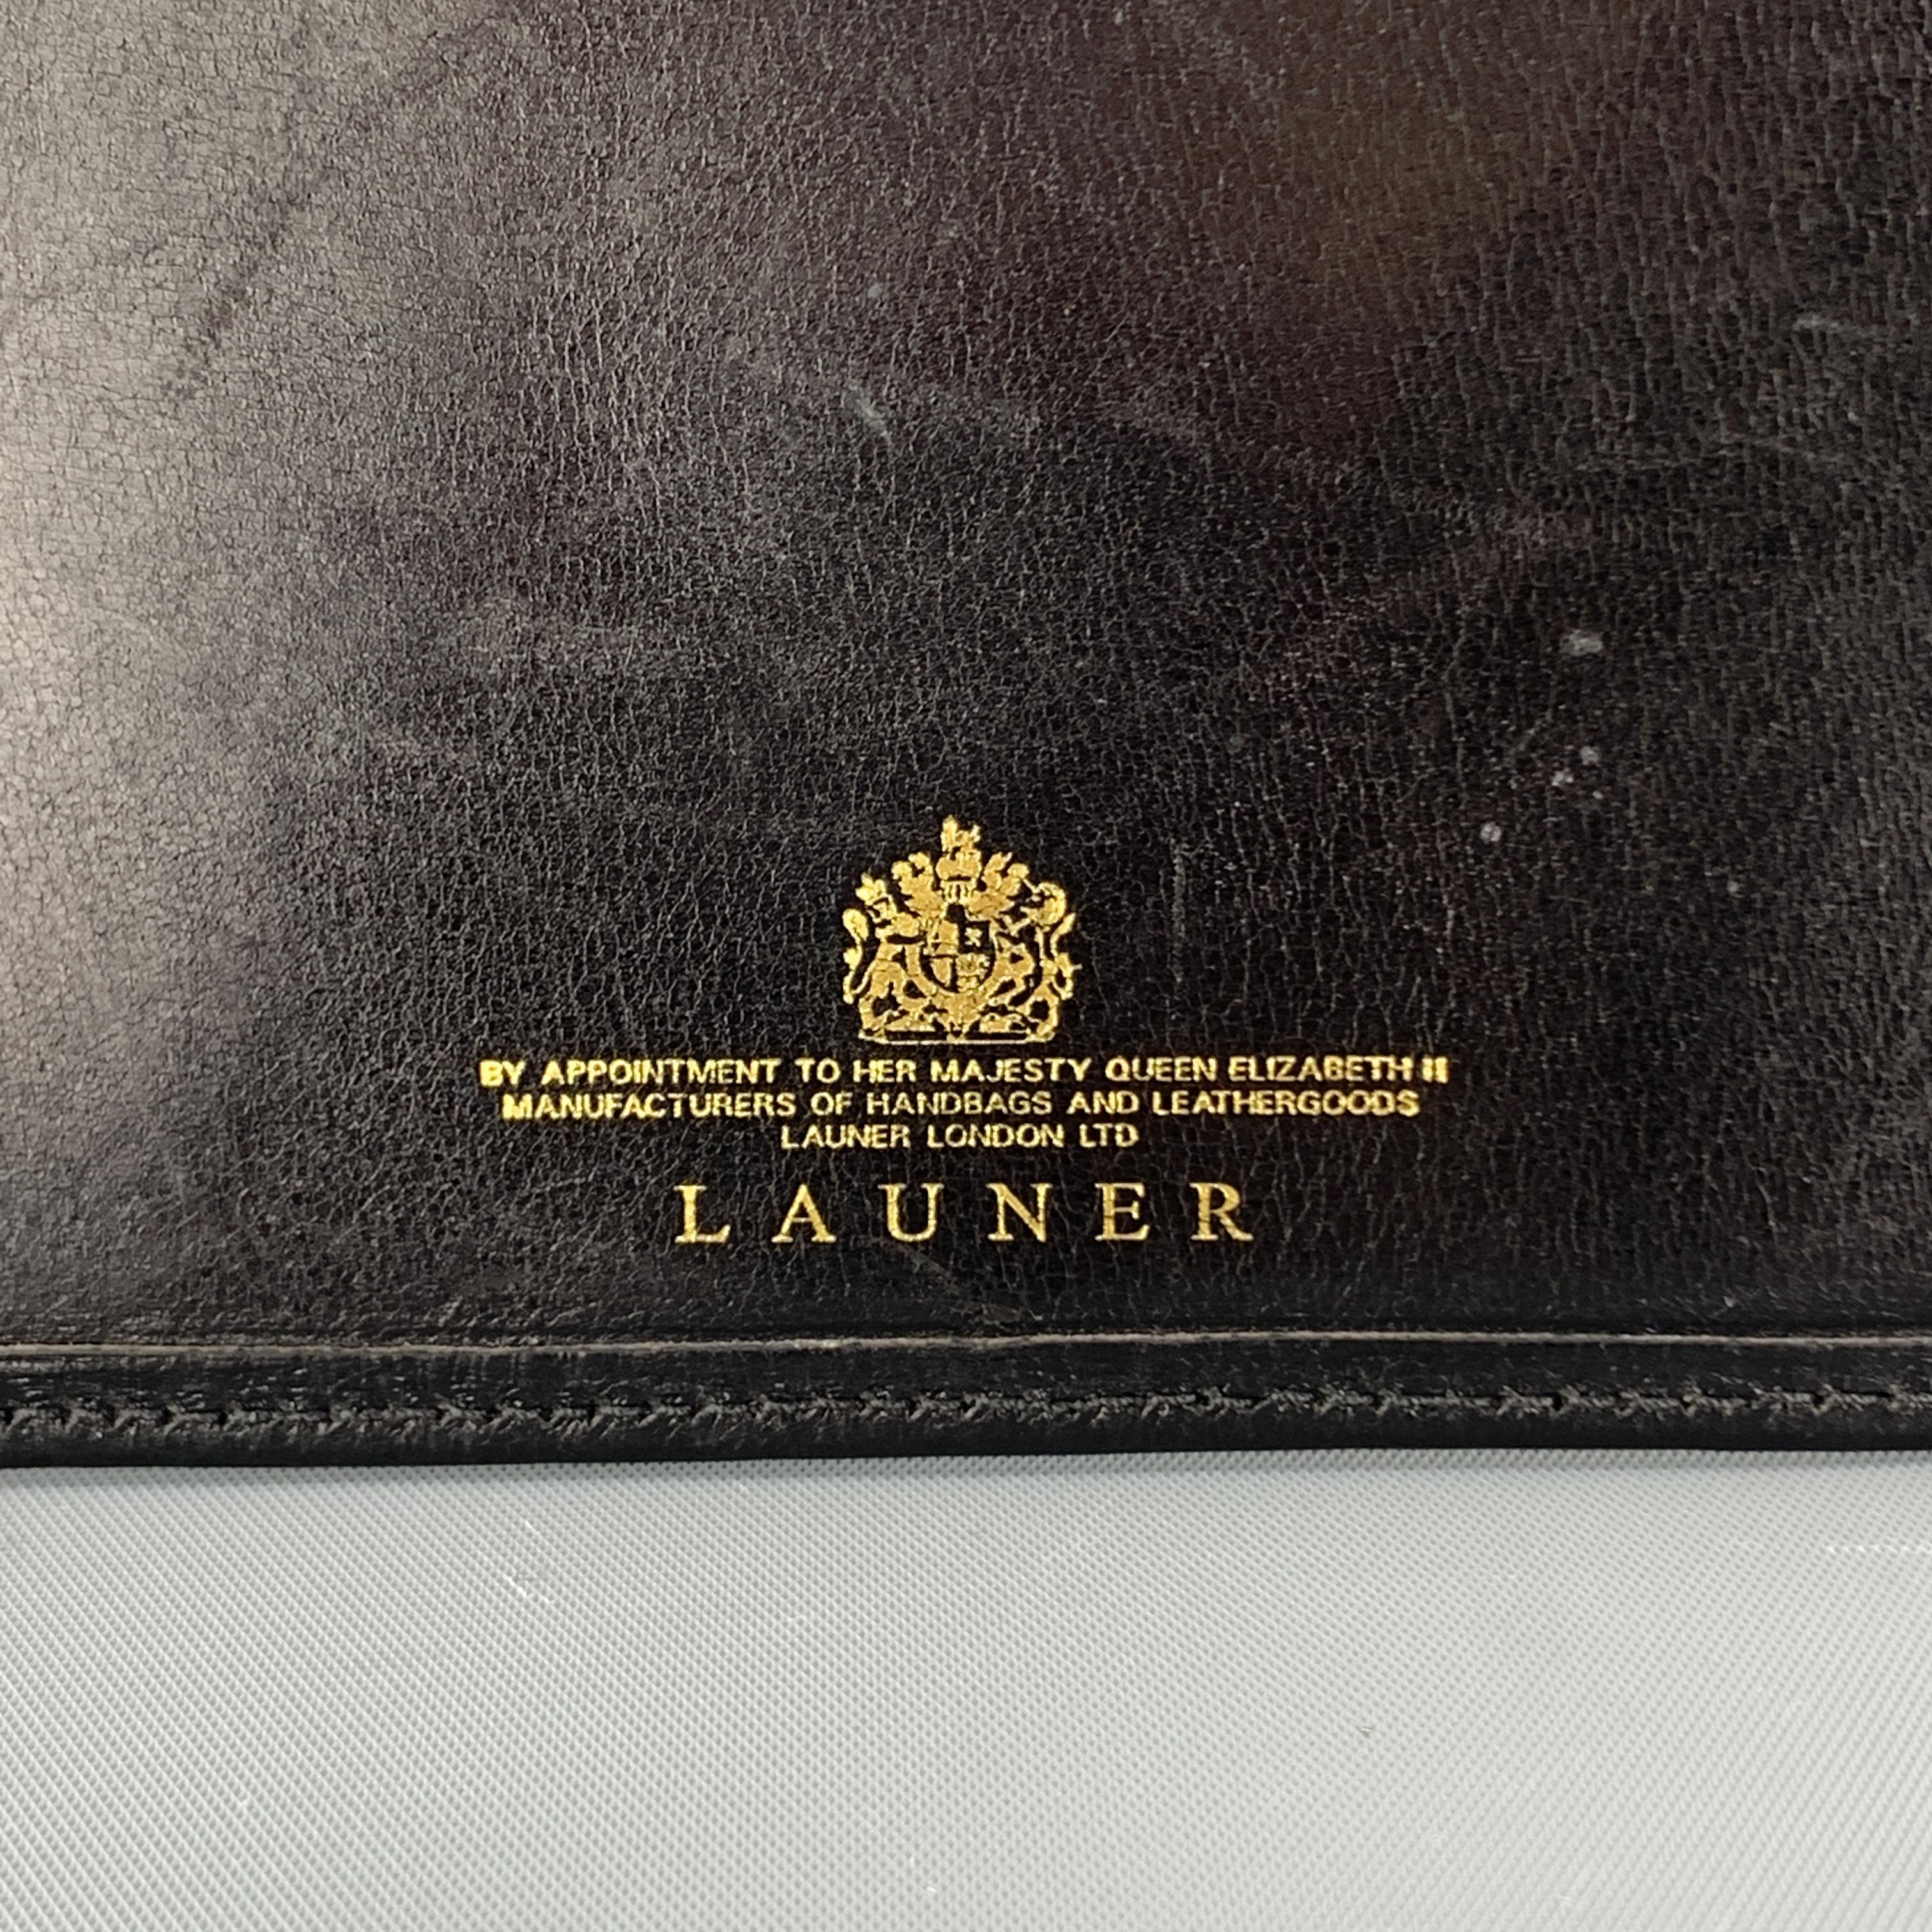 LAUNER card case comes in black leather with gold foil stamp. Made in England.

Very Good Pre-Owned Condition.

5.75 x 3.75 in.